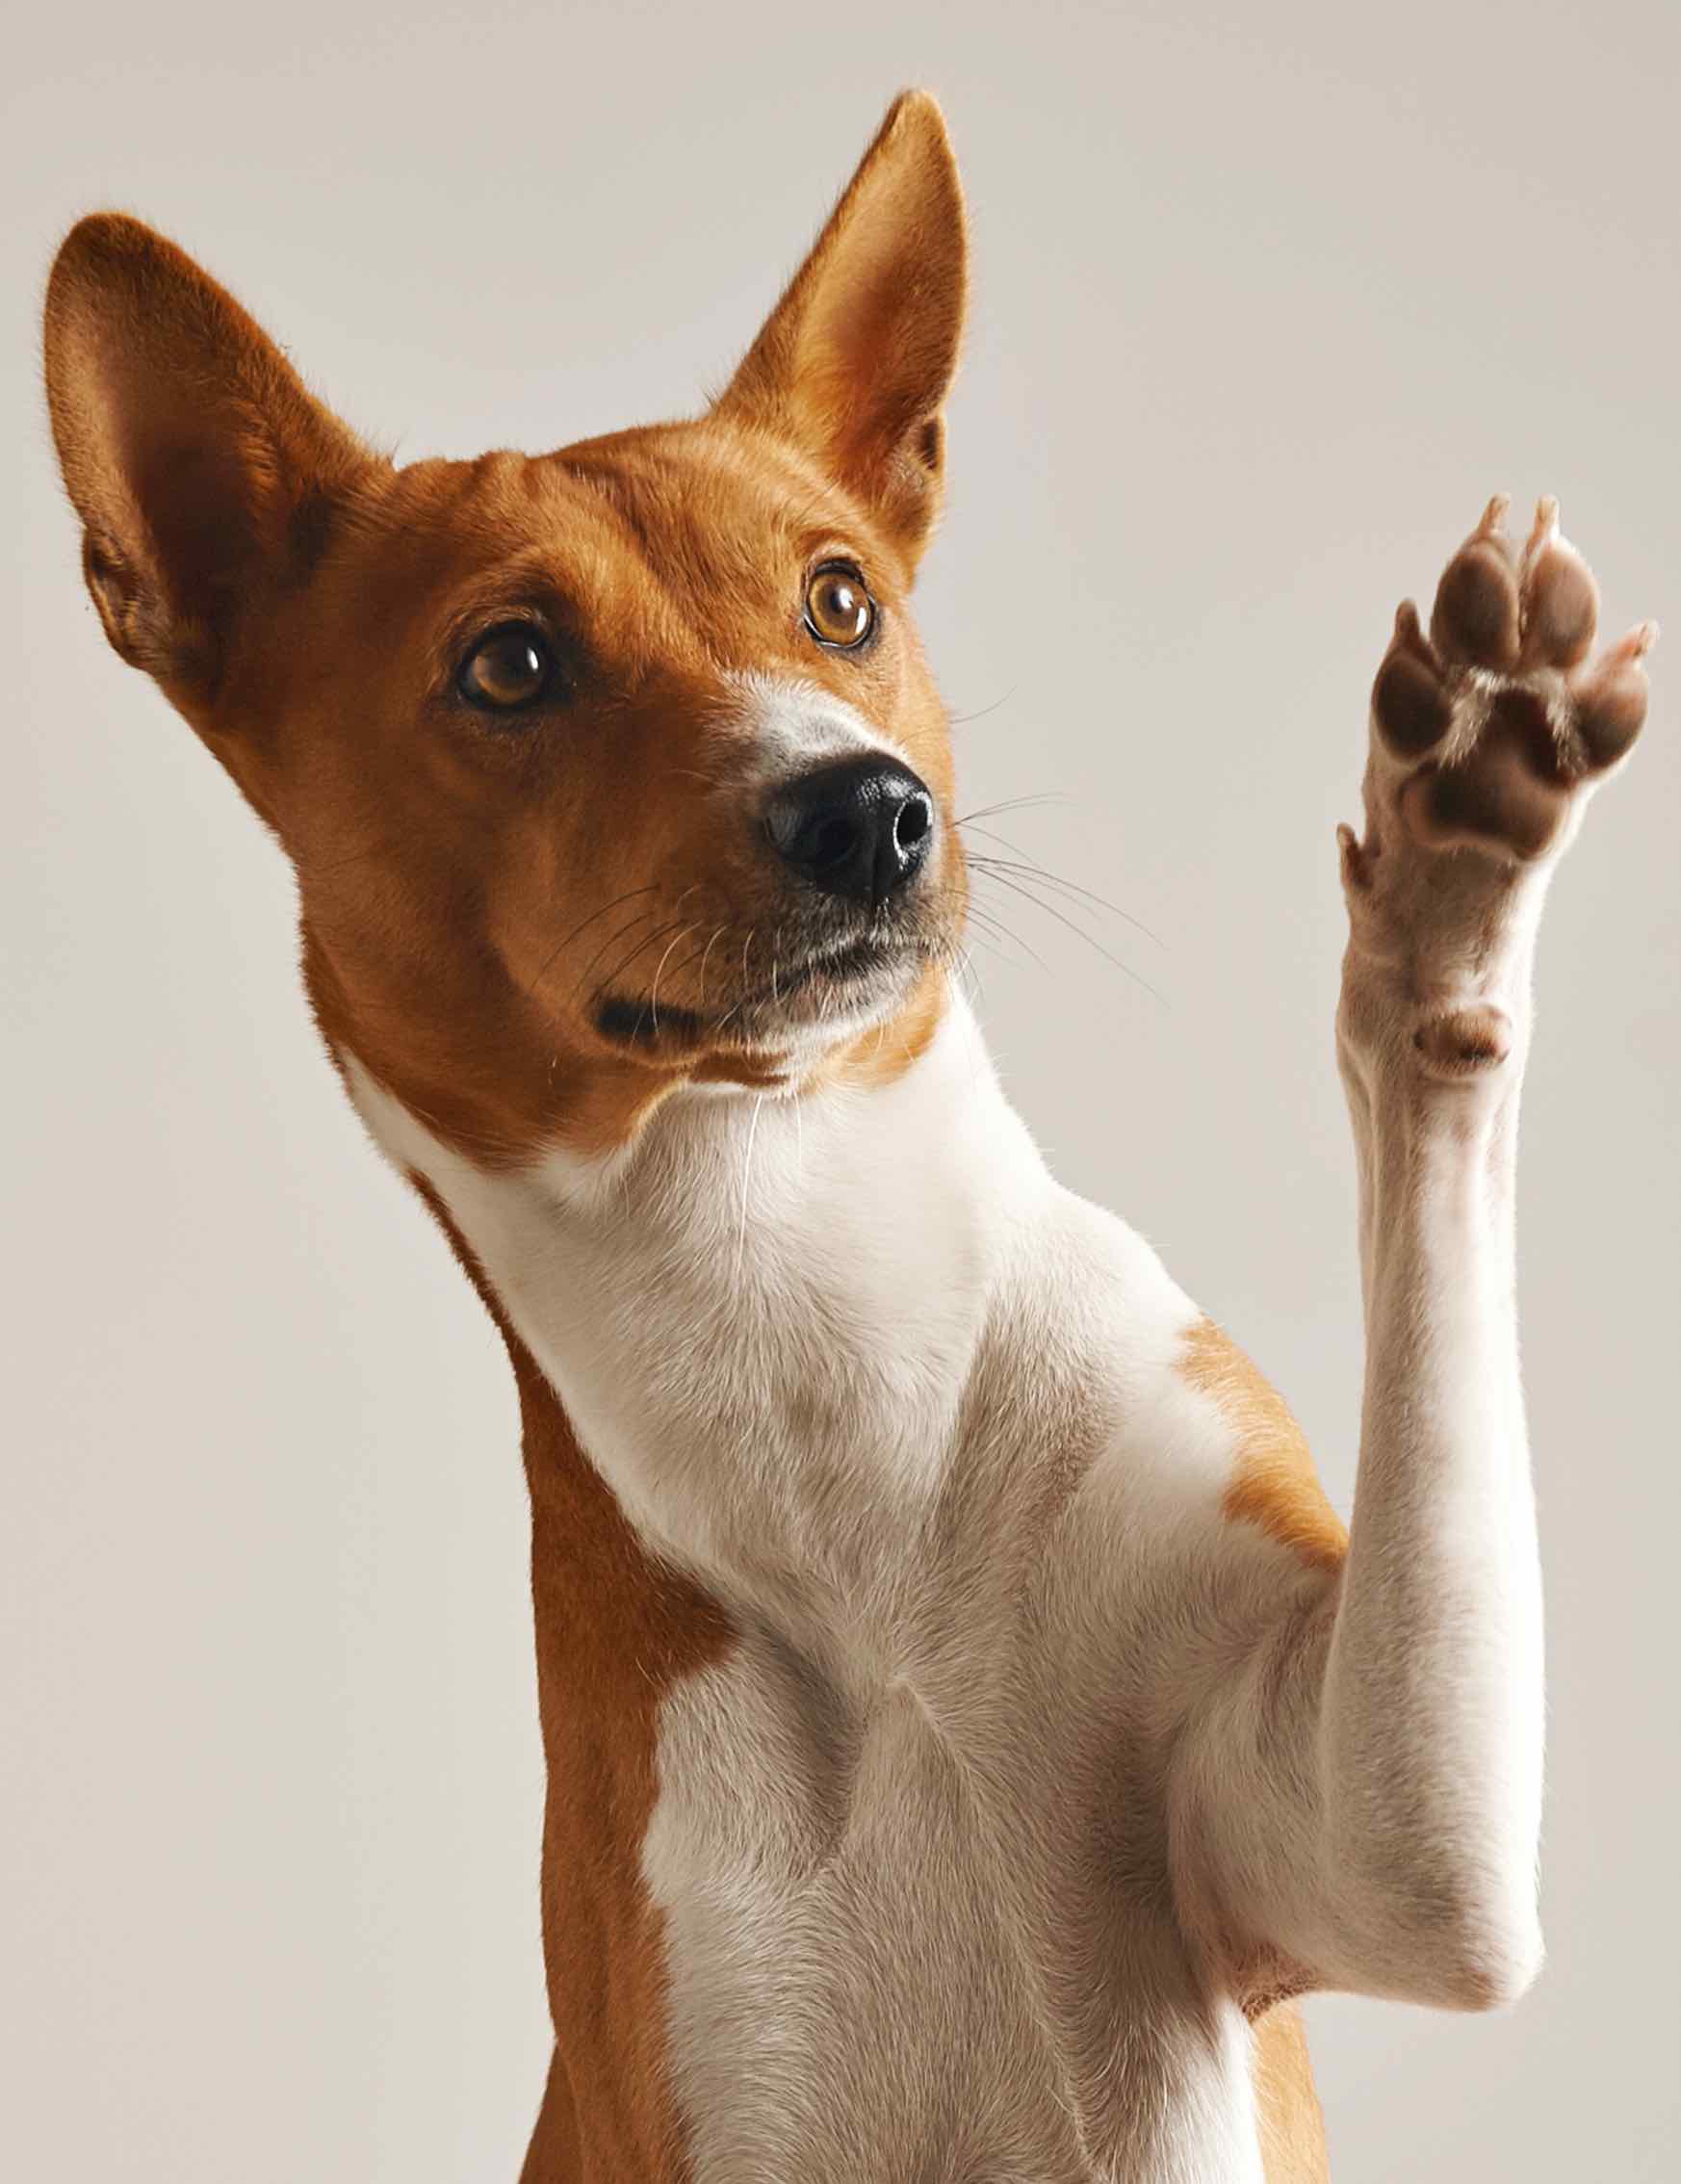 Dog raising his paw to ask a question during Dog Training Elite training class in Albuquerque / Santa Fe.